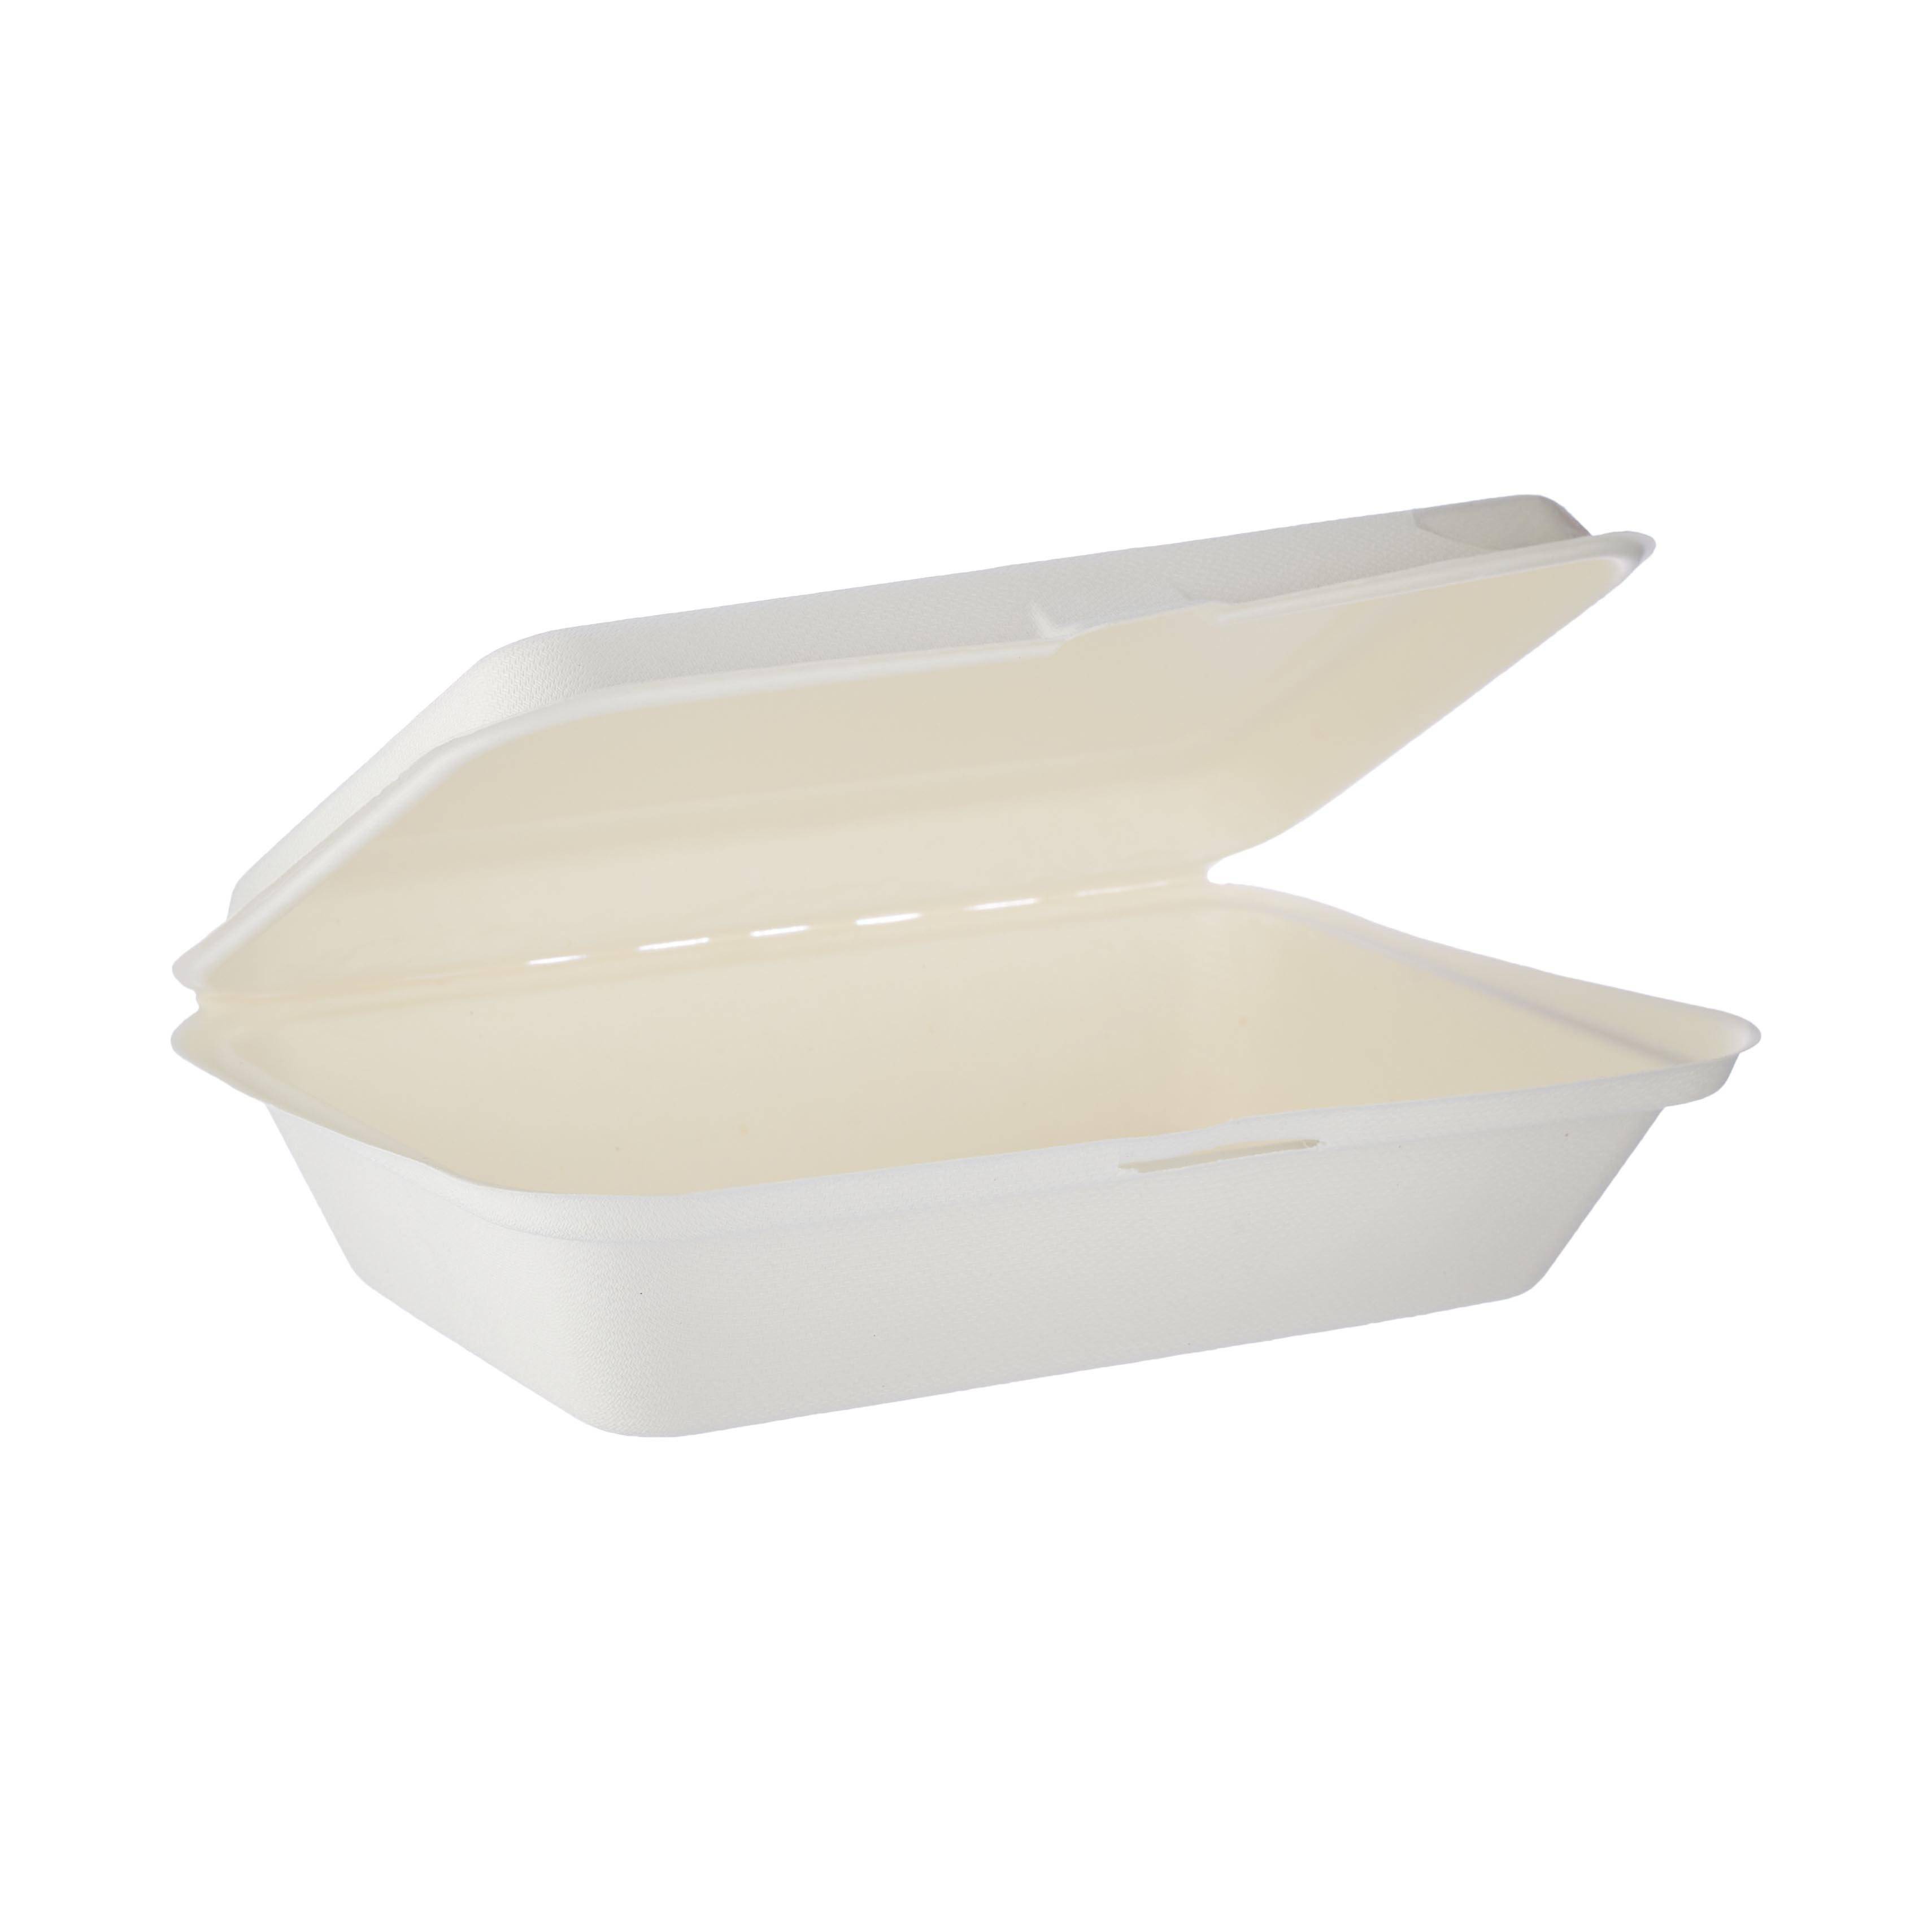 2 Compartment Clamshell Food Container - 9x6 Divided Hinged To